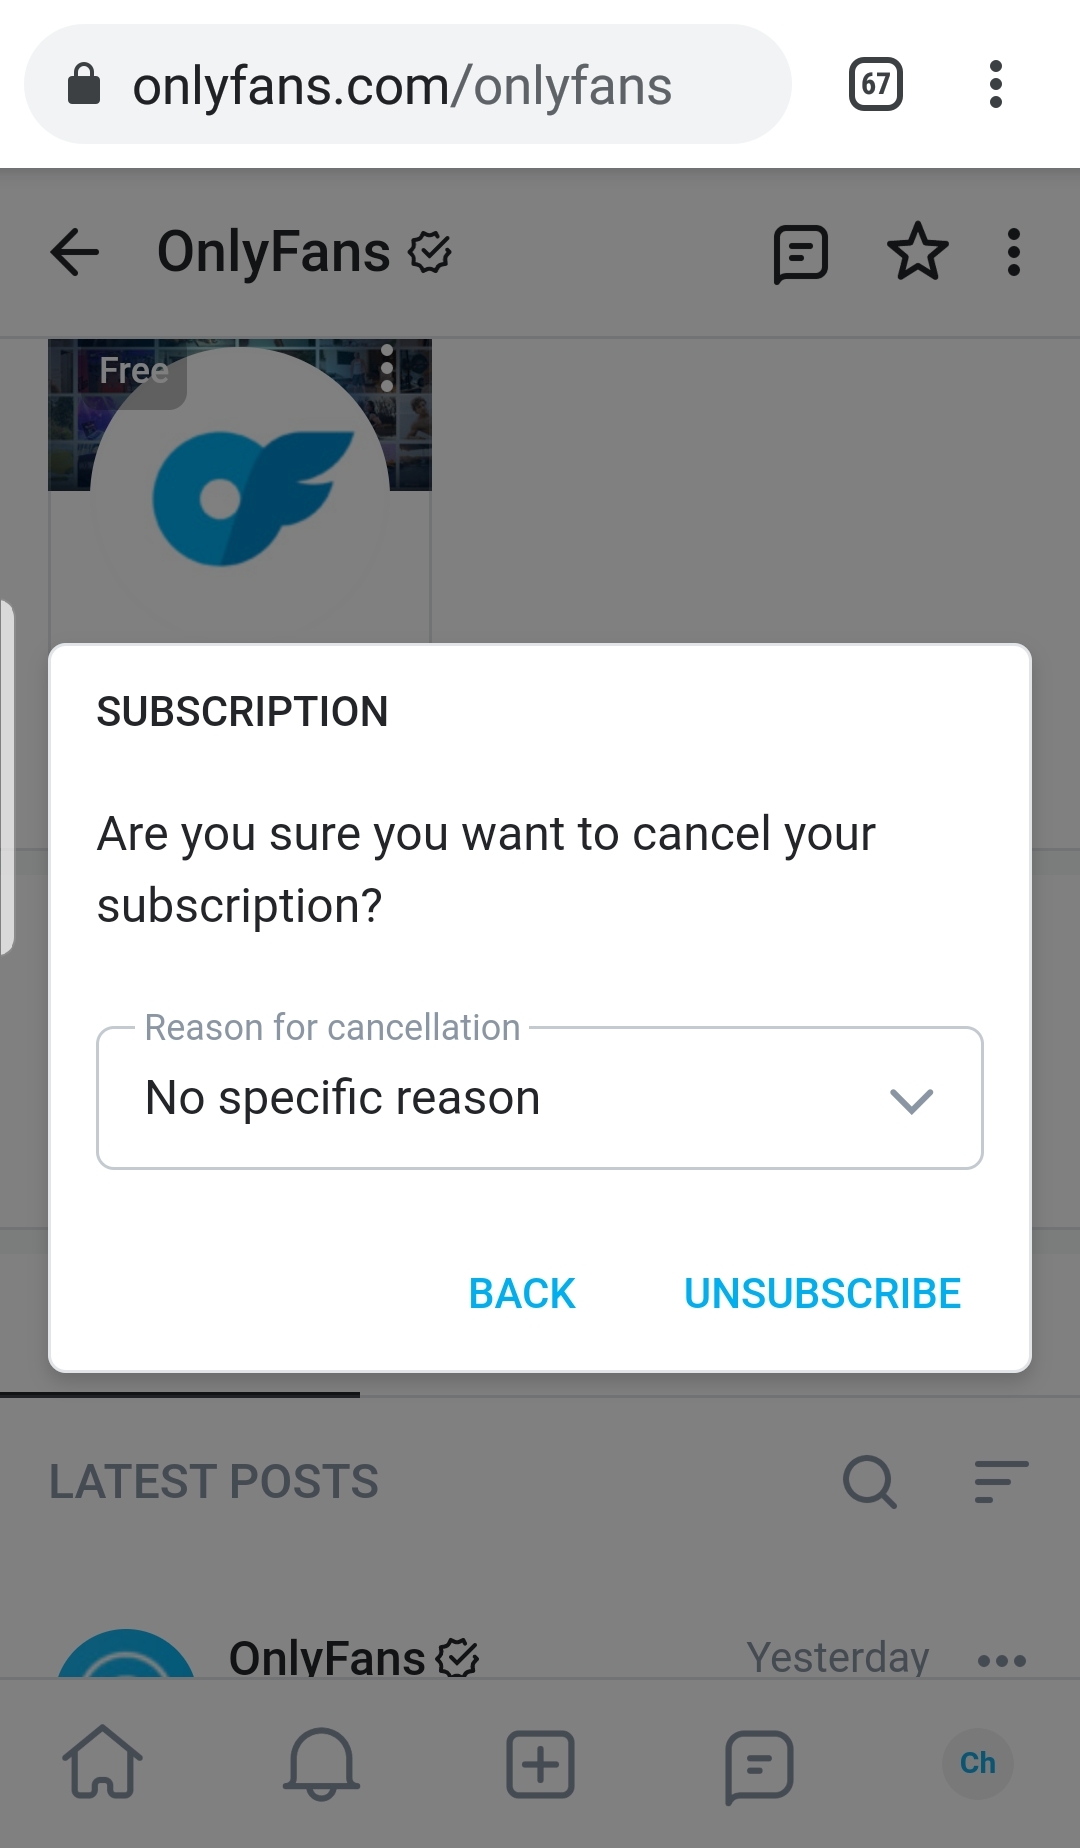 How to unsubscribe only fans